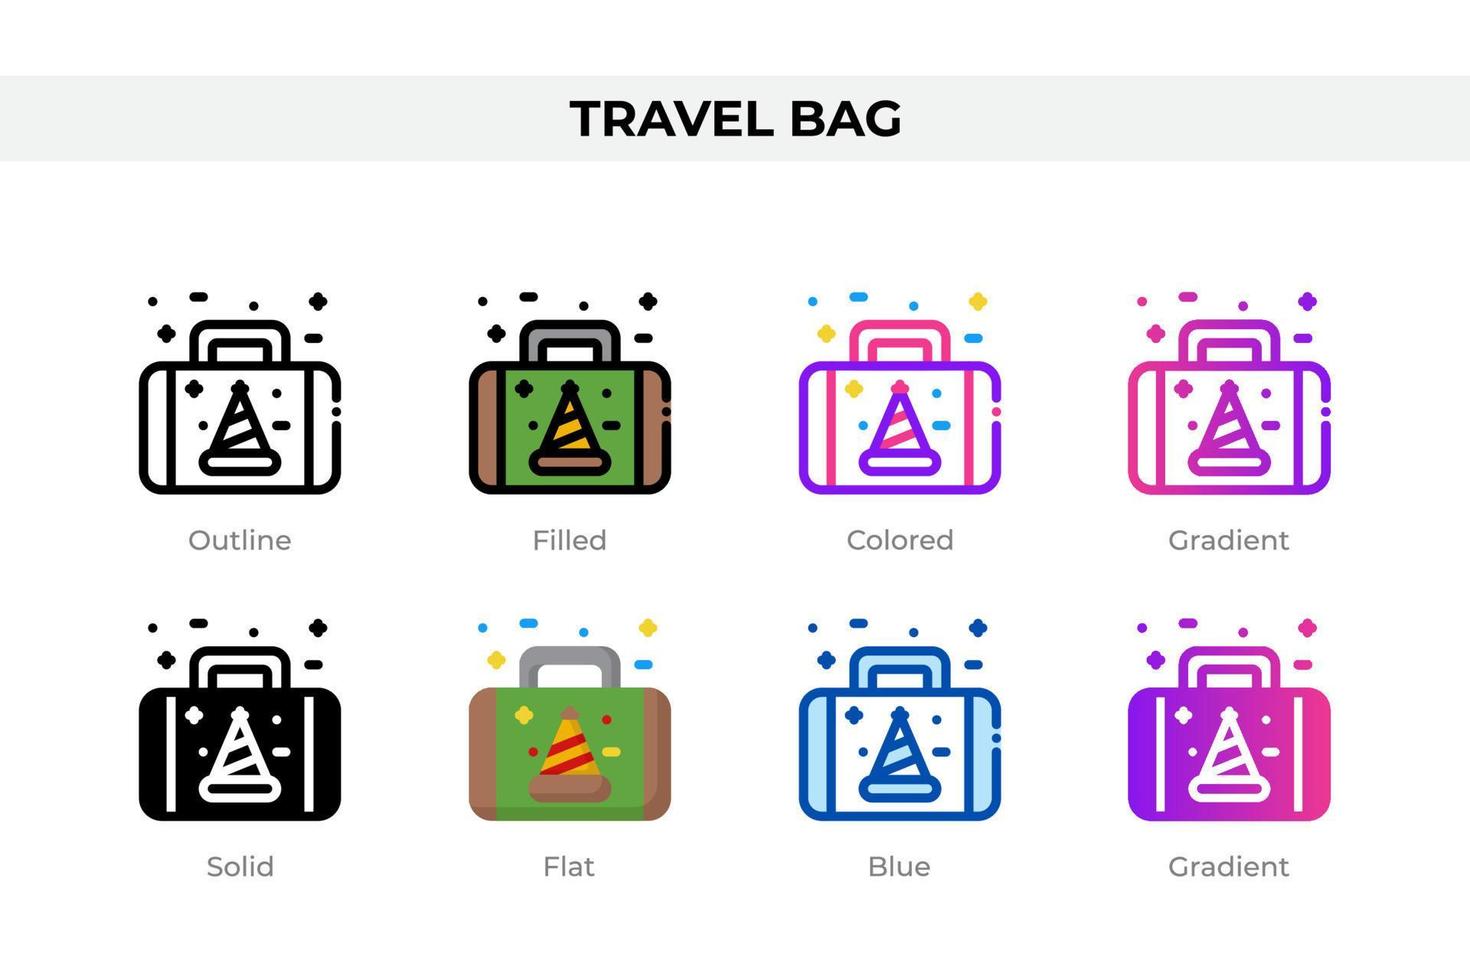 Travel bag icons in different style. Travel bag icons set. Holiday symbol. Different style icons set. Vector illustration